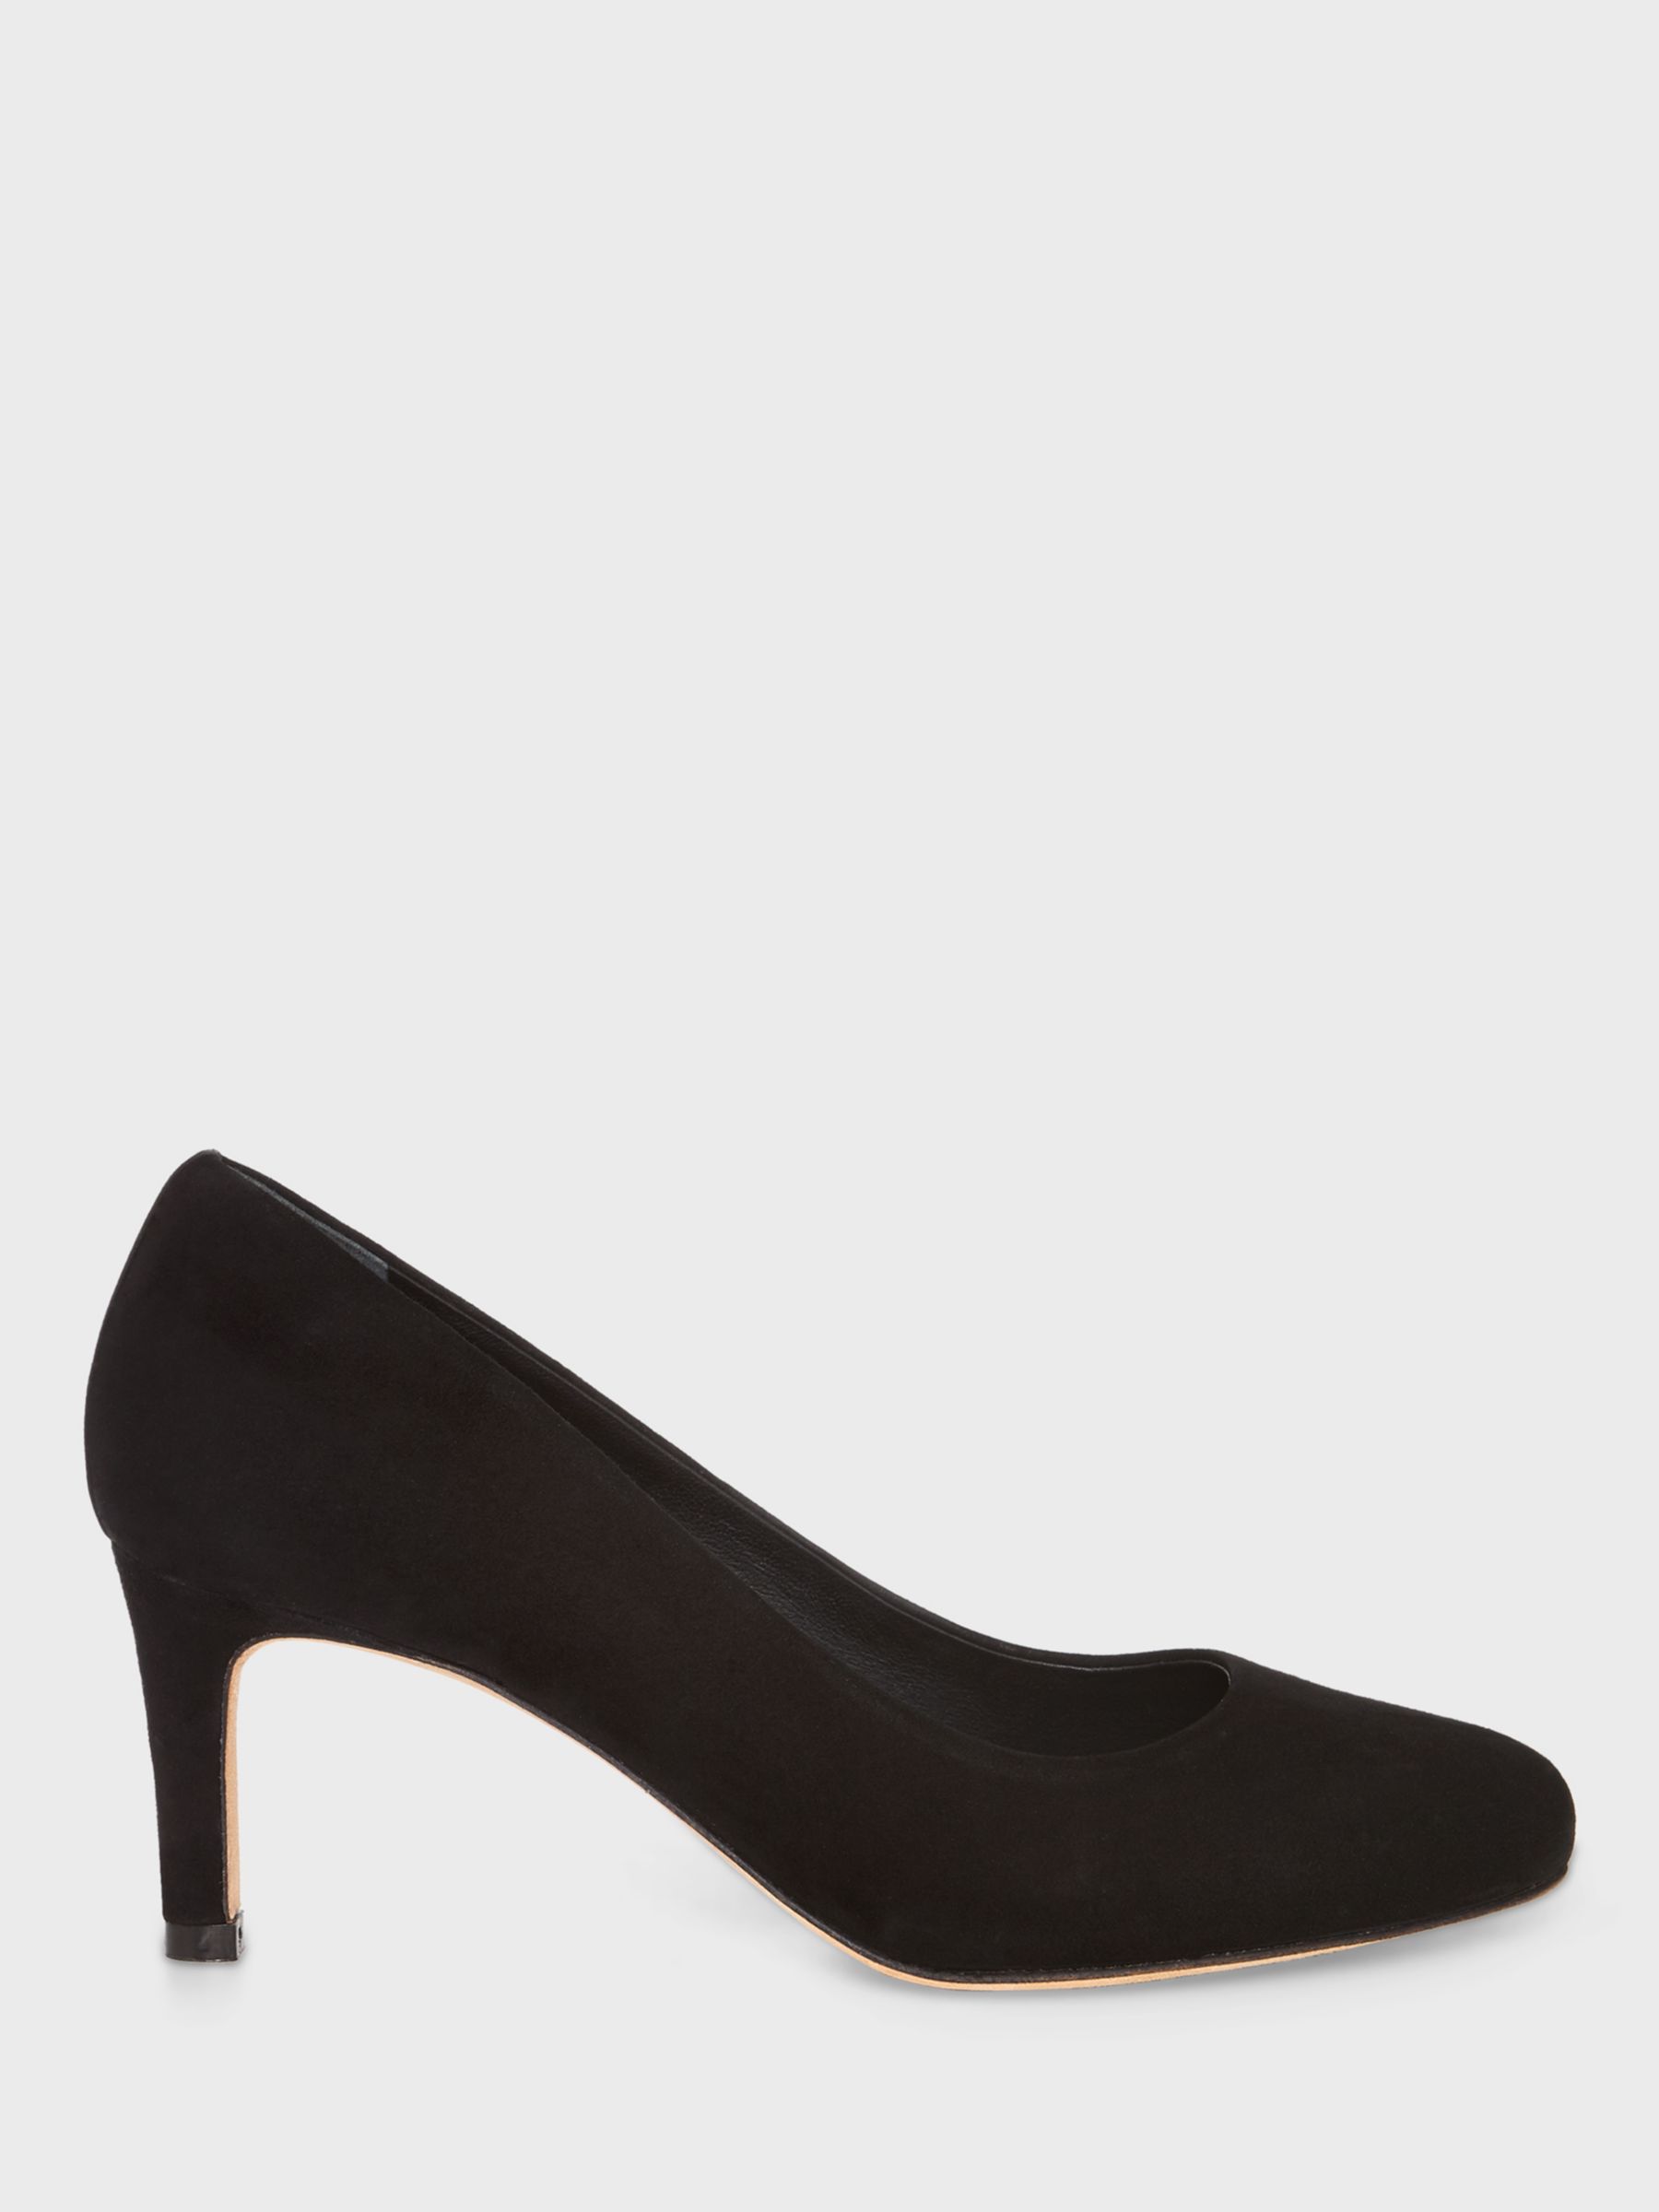 Hobbs Lizzie Suede Court Shoes, Black at John Lewis & Partners